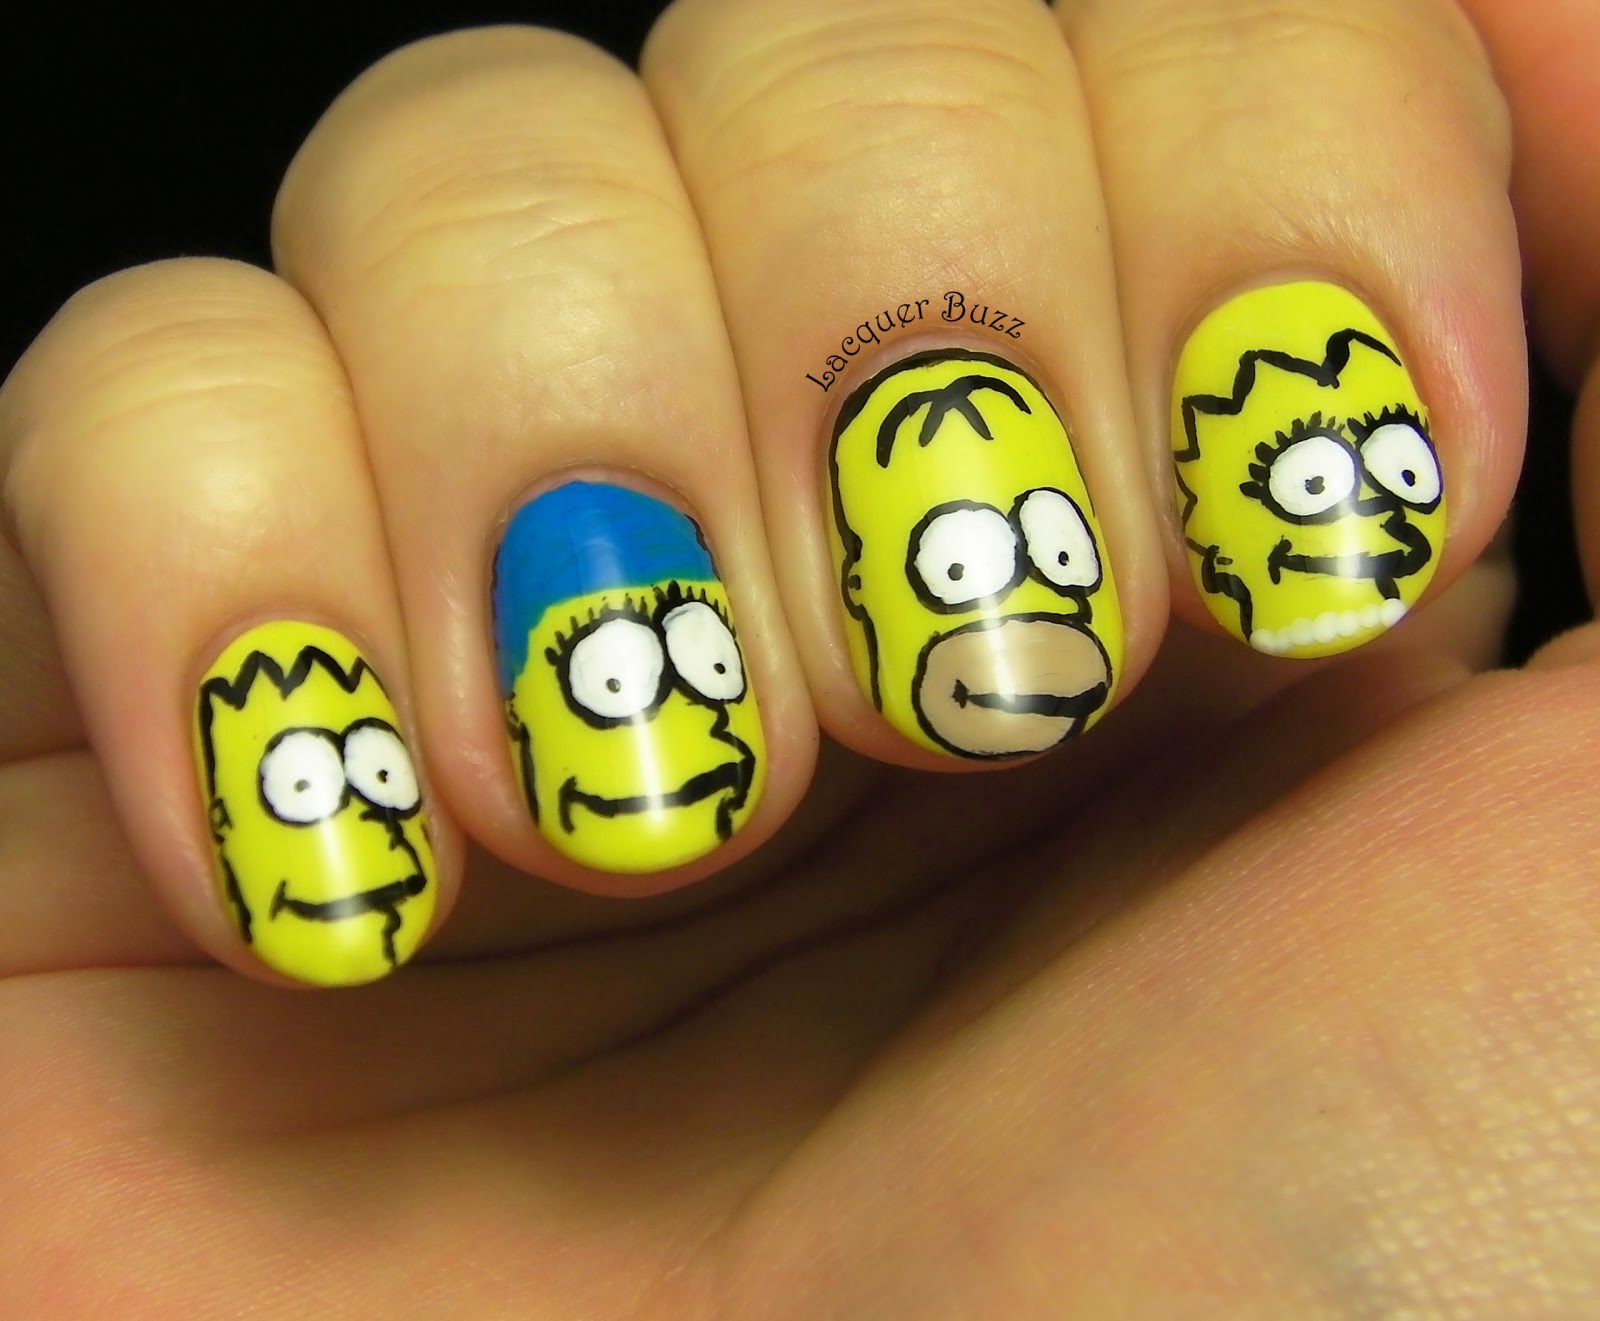 Lacquer Buzz: TPA Group Challenge: Inspired by Cartoons